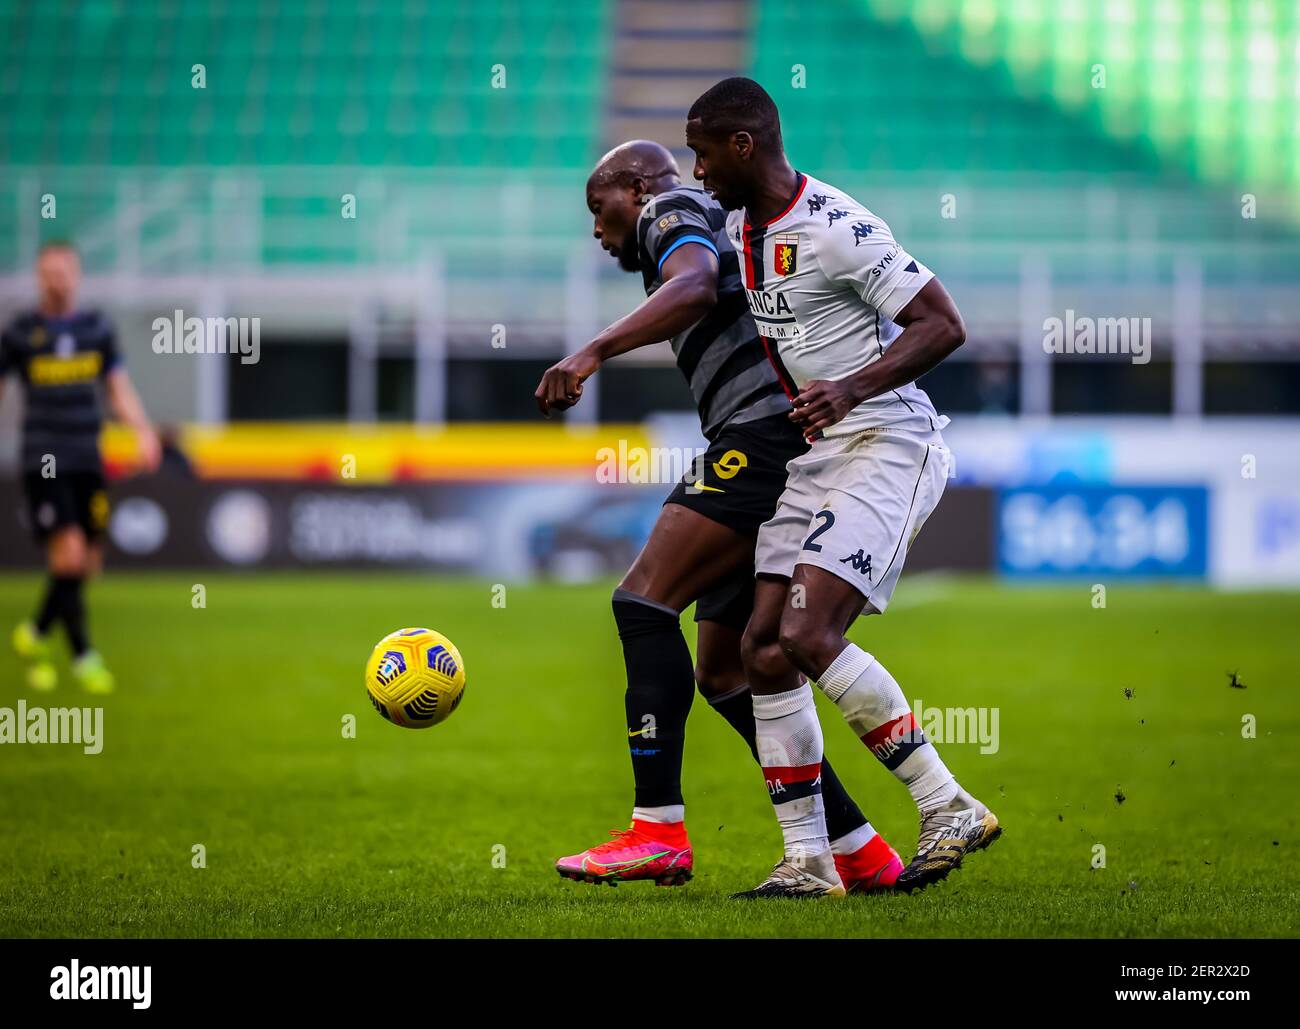 Milan, Italy. 28th Feb, 2021. Romelu Lukaku of FC Internazionale fights for the ball against Cristian Zapata of Genoa CFC during FC Internazionale vs Genoa CFC, Italian football Serie A match in Milan, Italy, February 28 2021 Credit: Independent Photo Agency/Alamy Live News Stock Photo